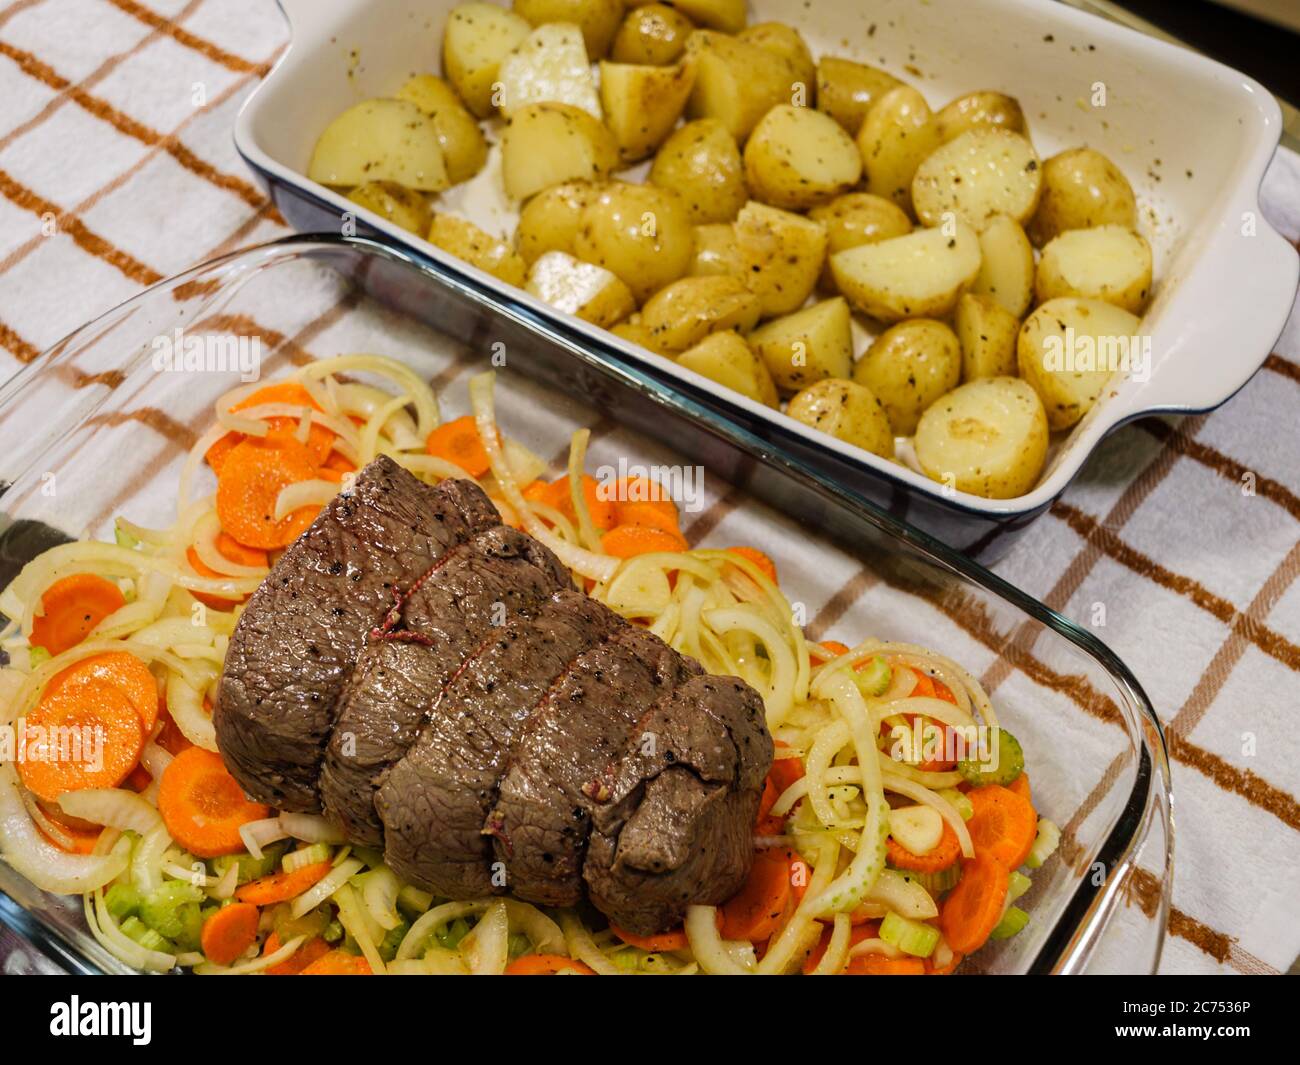 A traditional Sunday Roast meal of a topside roast beef and potatoes on a rustic checked tablecloth in a domestic kitchen Stock Photo